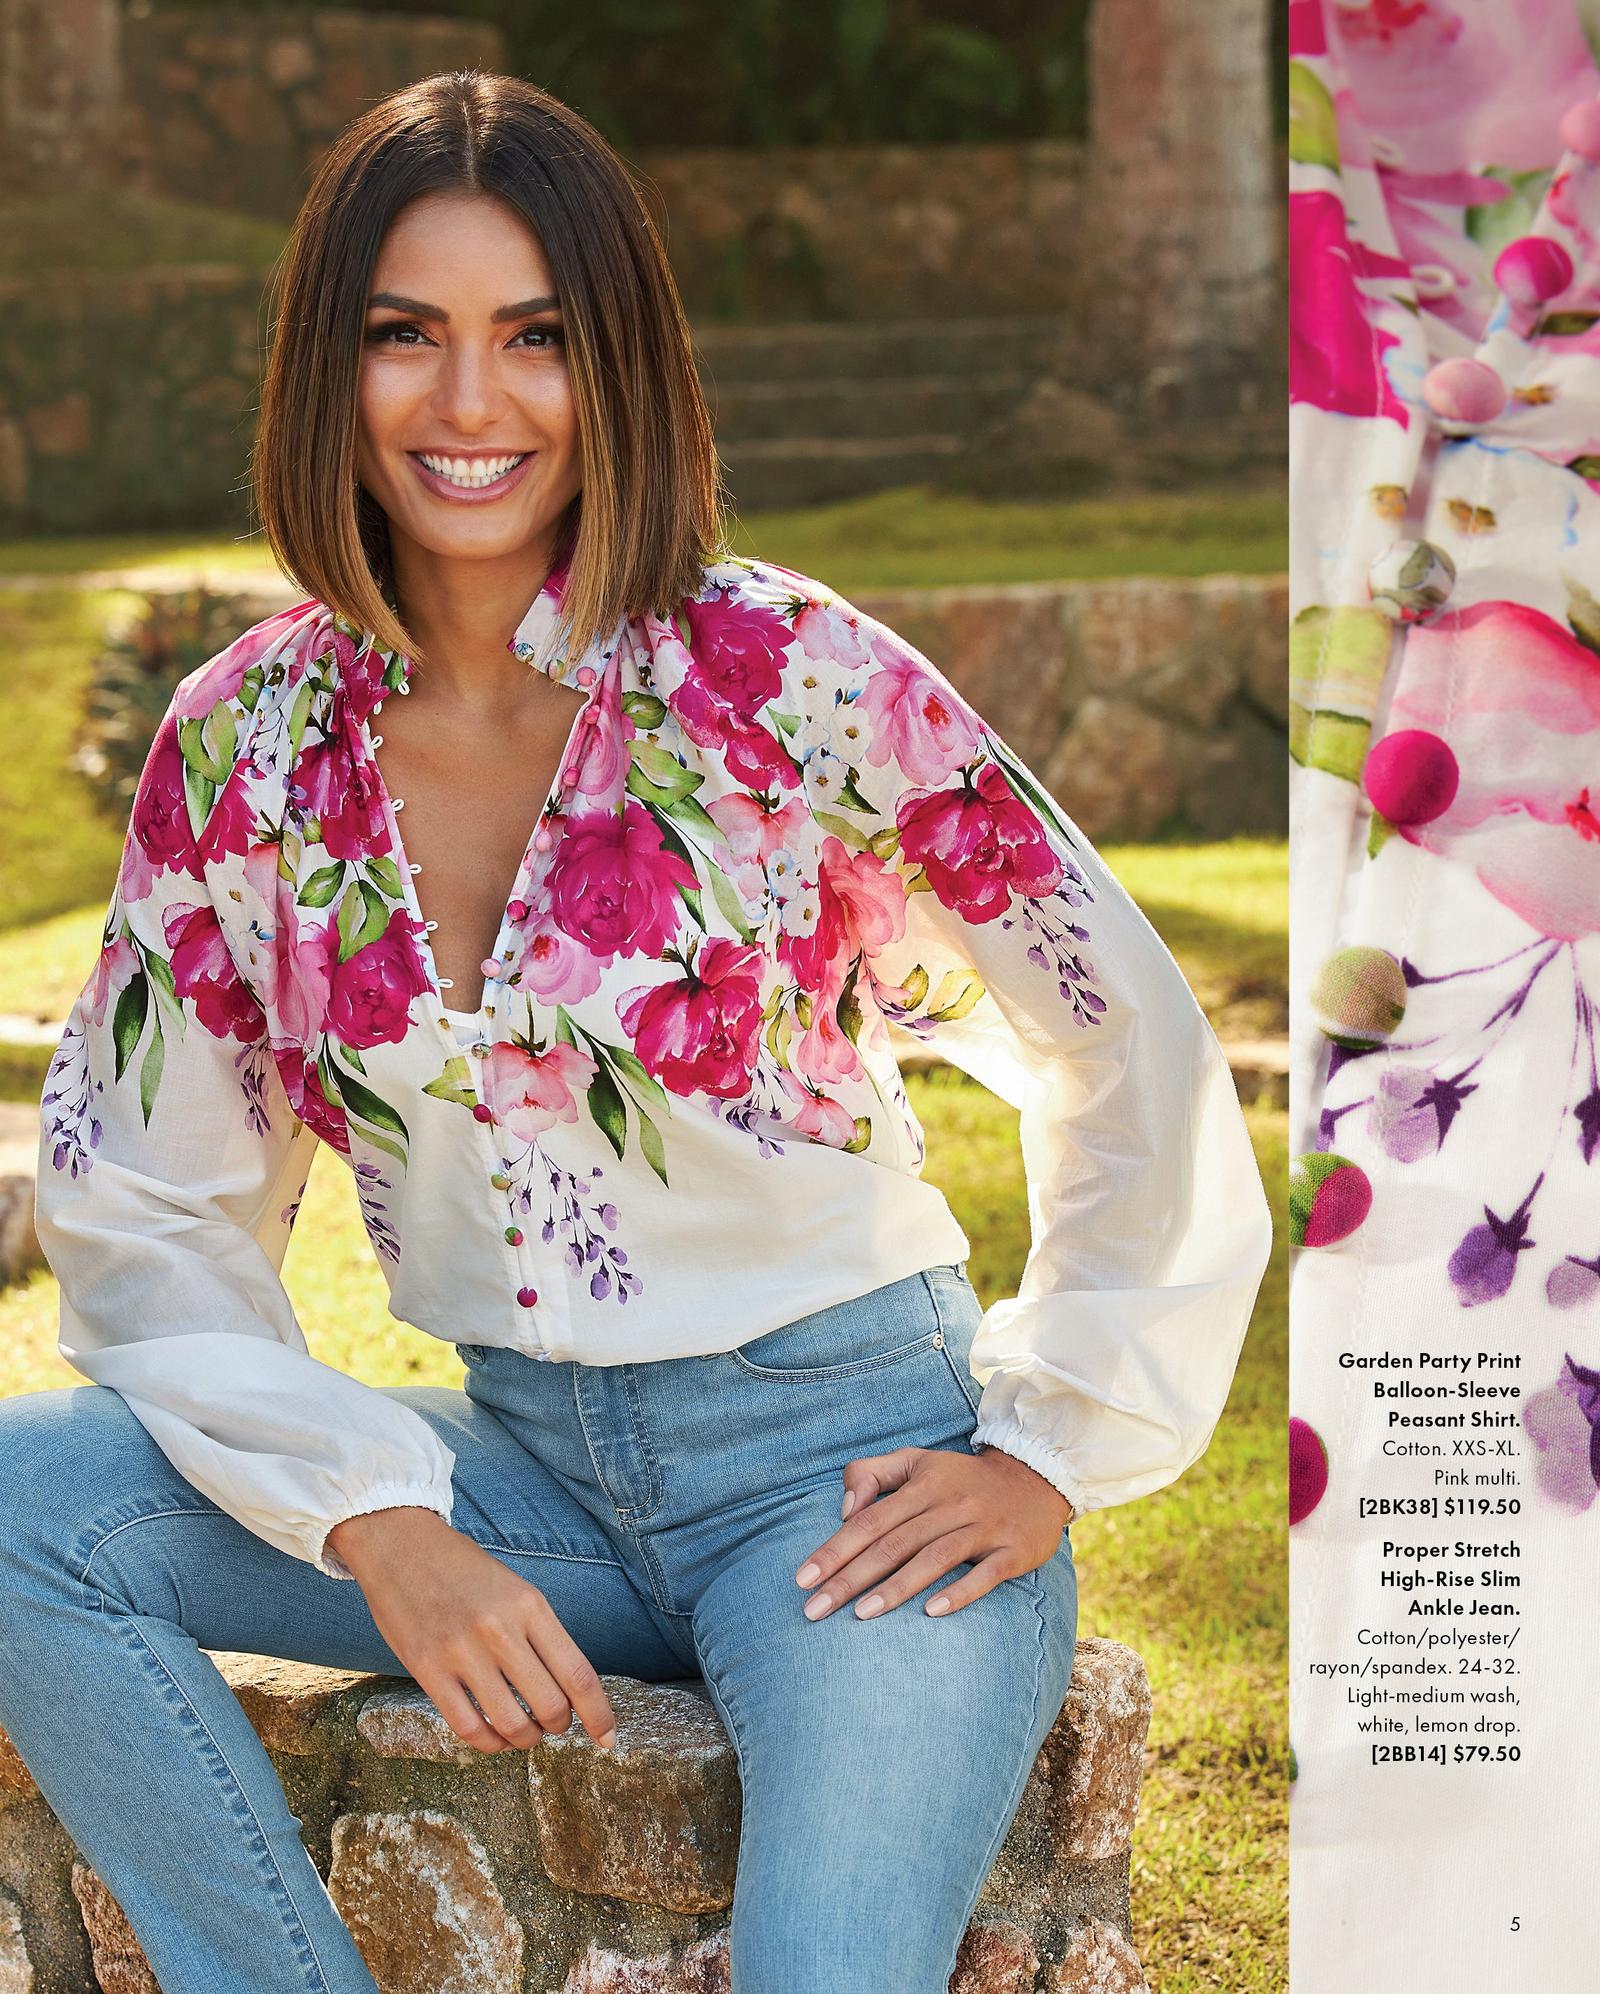 model wearing a white and pink floral pattern balloon sleeve peasant shirt and light wash jeans.